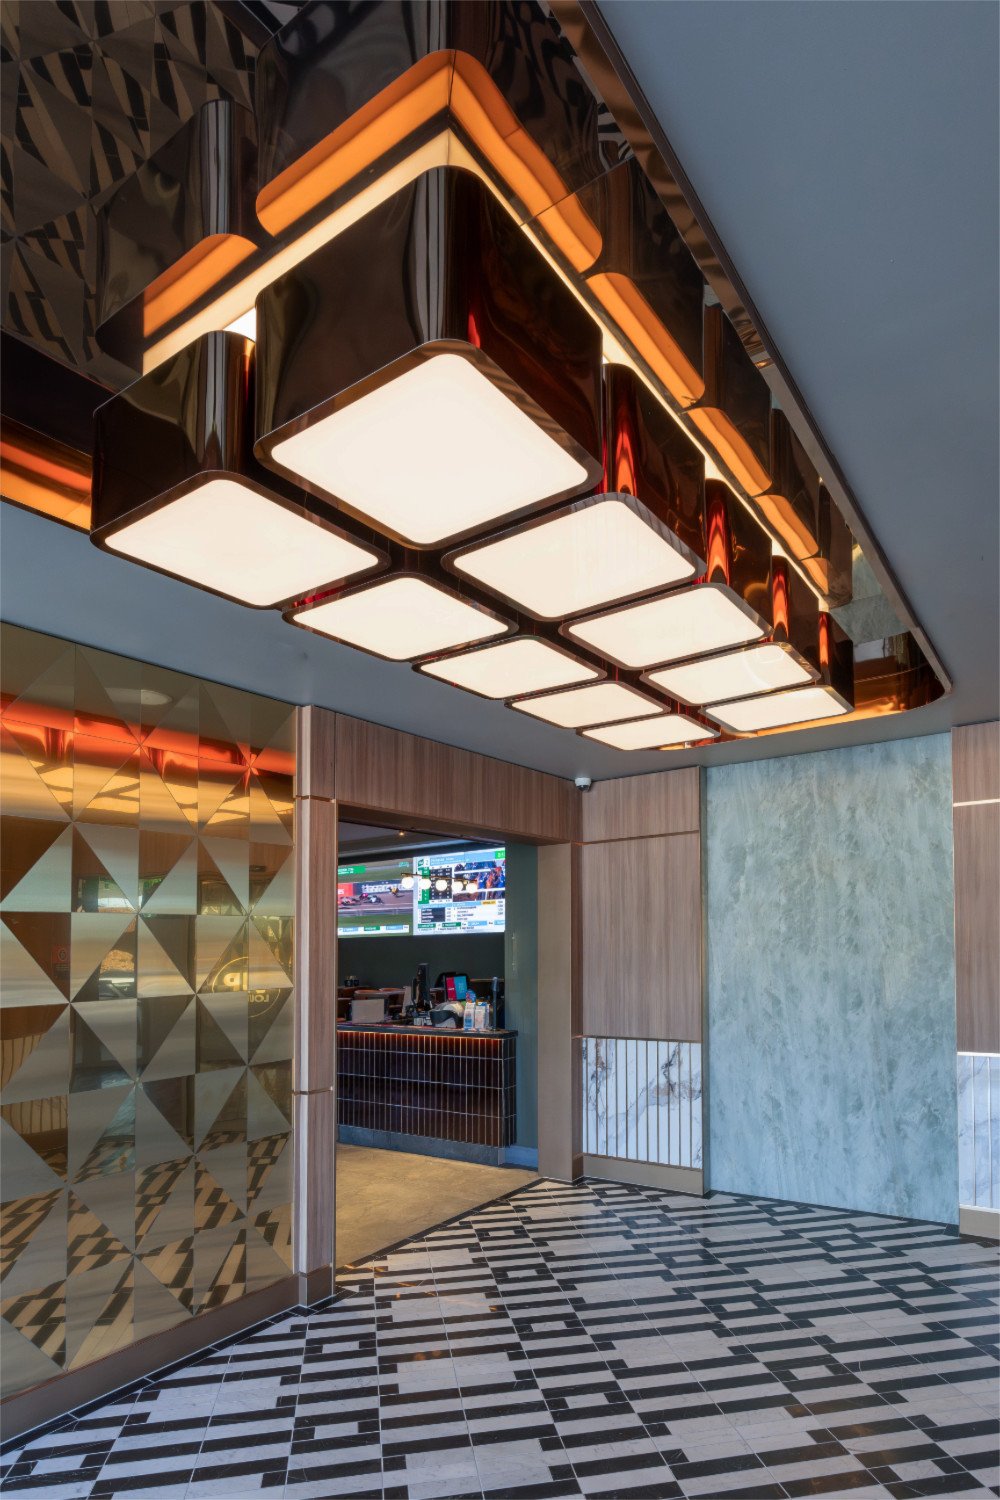 Willowdale Hotel: Sophisticated Custom Lighting and Water Feature